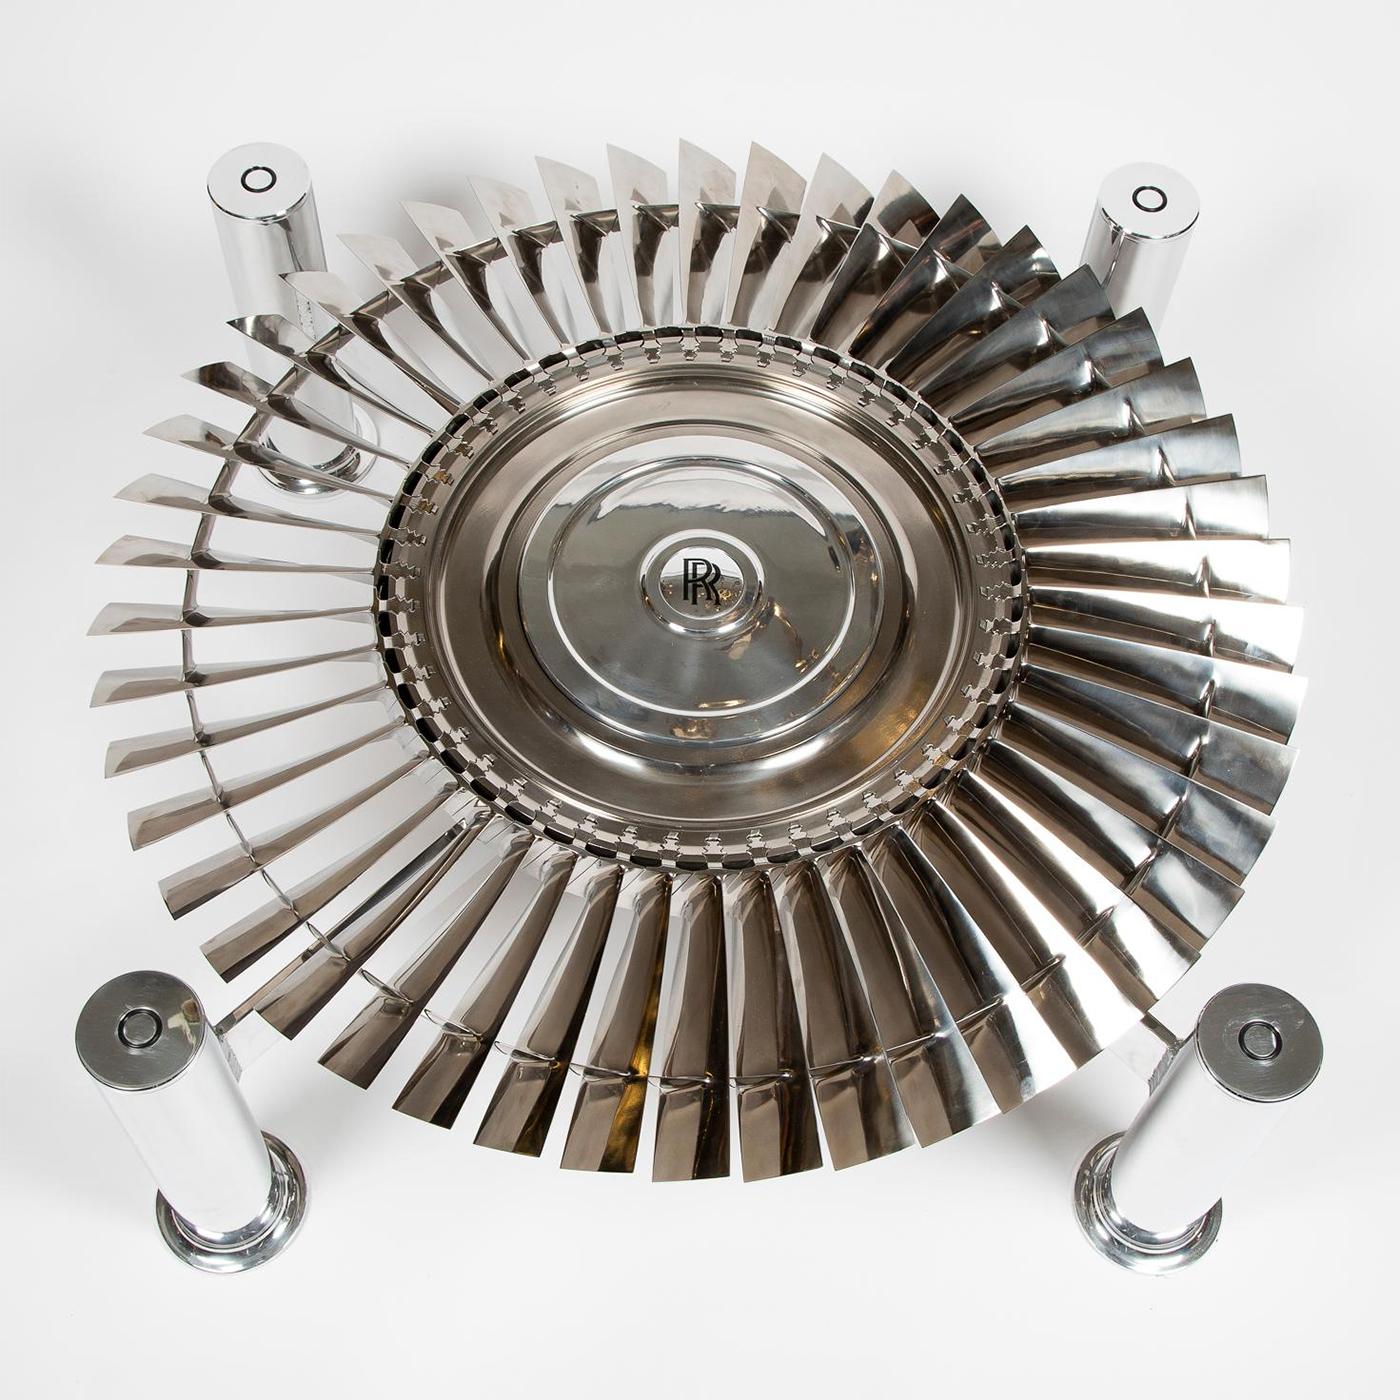 Coffee table Turbine Rolls Royce on polished aluminum base.
With rotating Rolls Royce turbine in titanium from the turbofan 
Pegasus fighter's engine. With strong clear glass top.
 